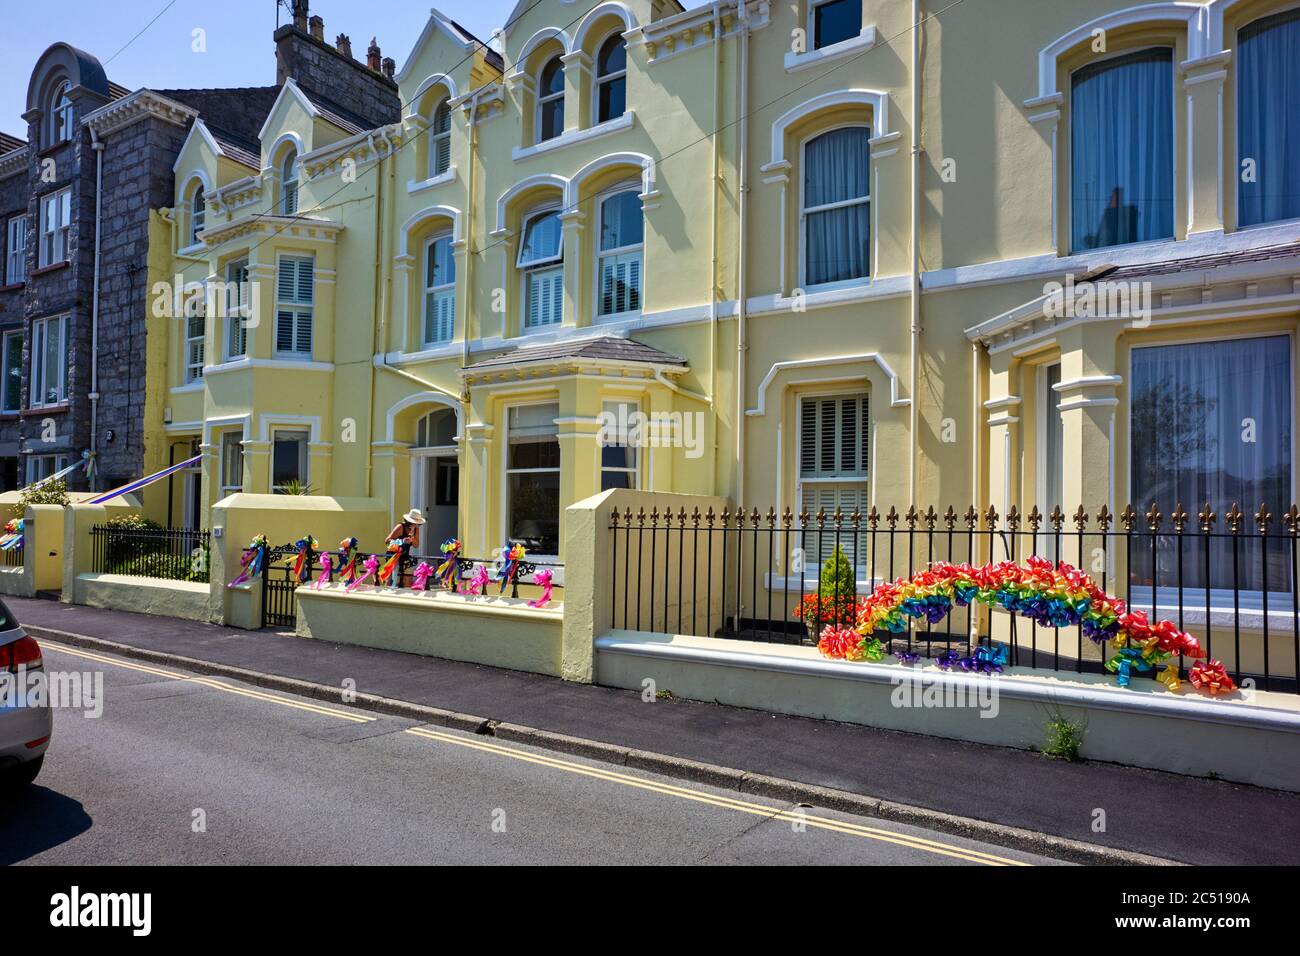 Virtue signalling of ribbons outside on railing of houses in The Crofts, Castletown, Isle of Man Stock Photo